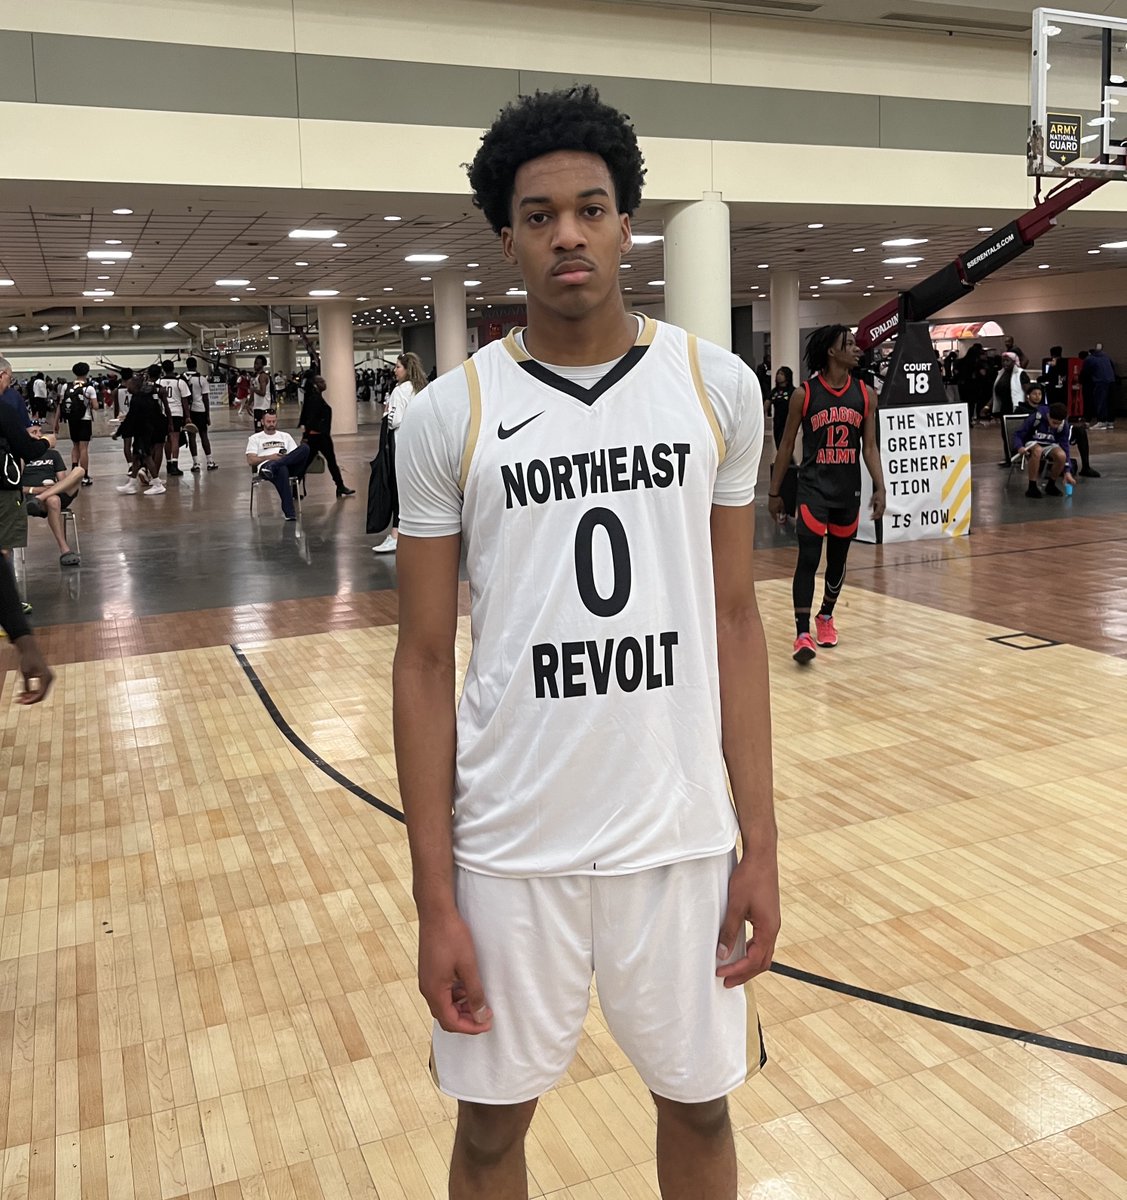 2025 wing Jared Smith has been flying under the radar, that will change by playing with NE6 Revolt on the MADE Hoops Circuit: madehoops.com/made-society/a…